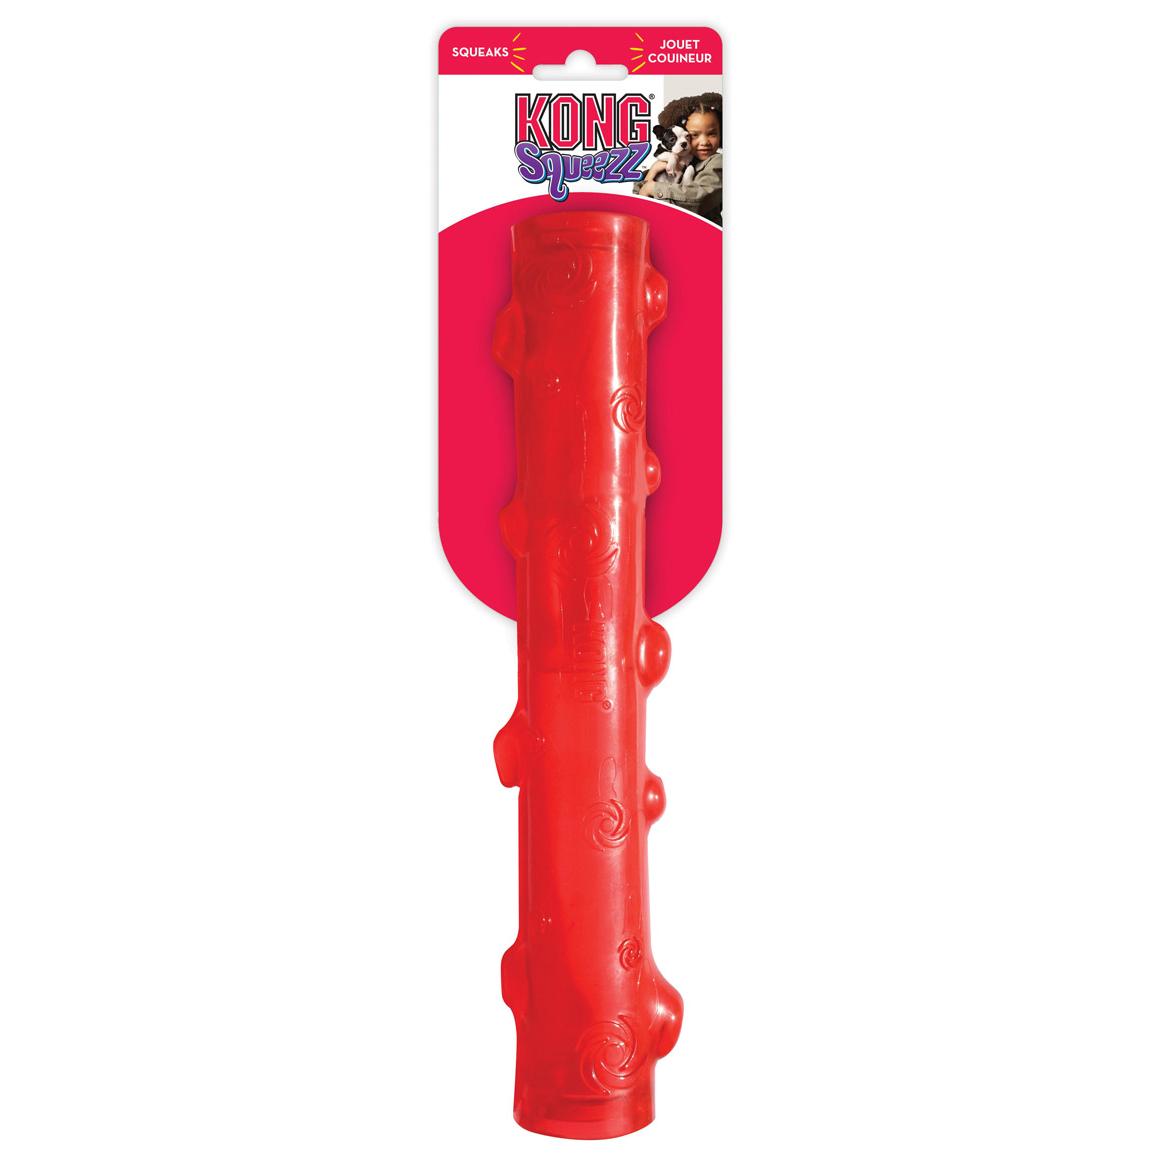 KONG Squeezz Stick Squeaky Dog Toy